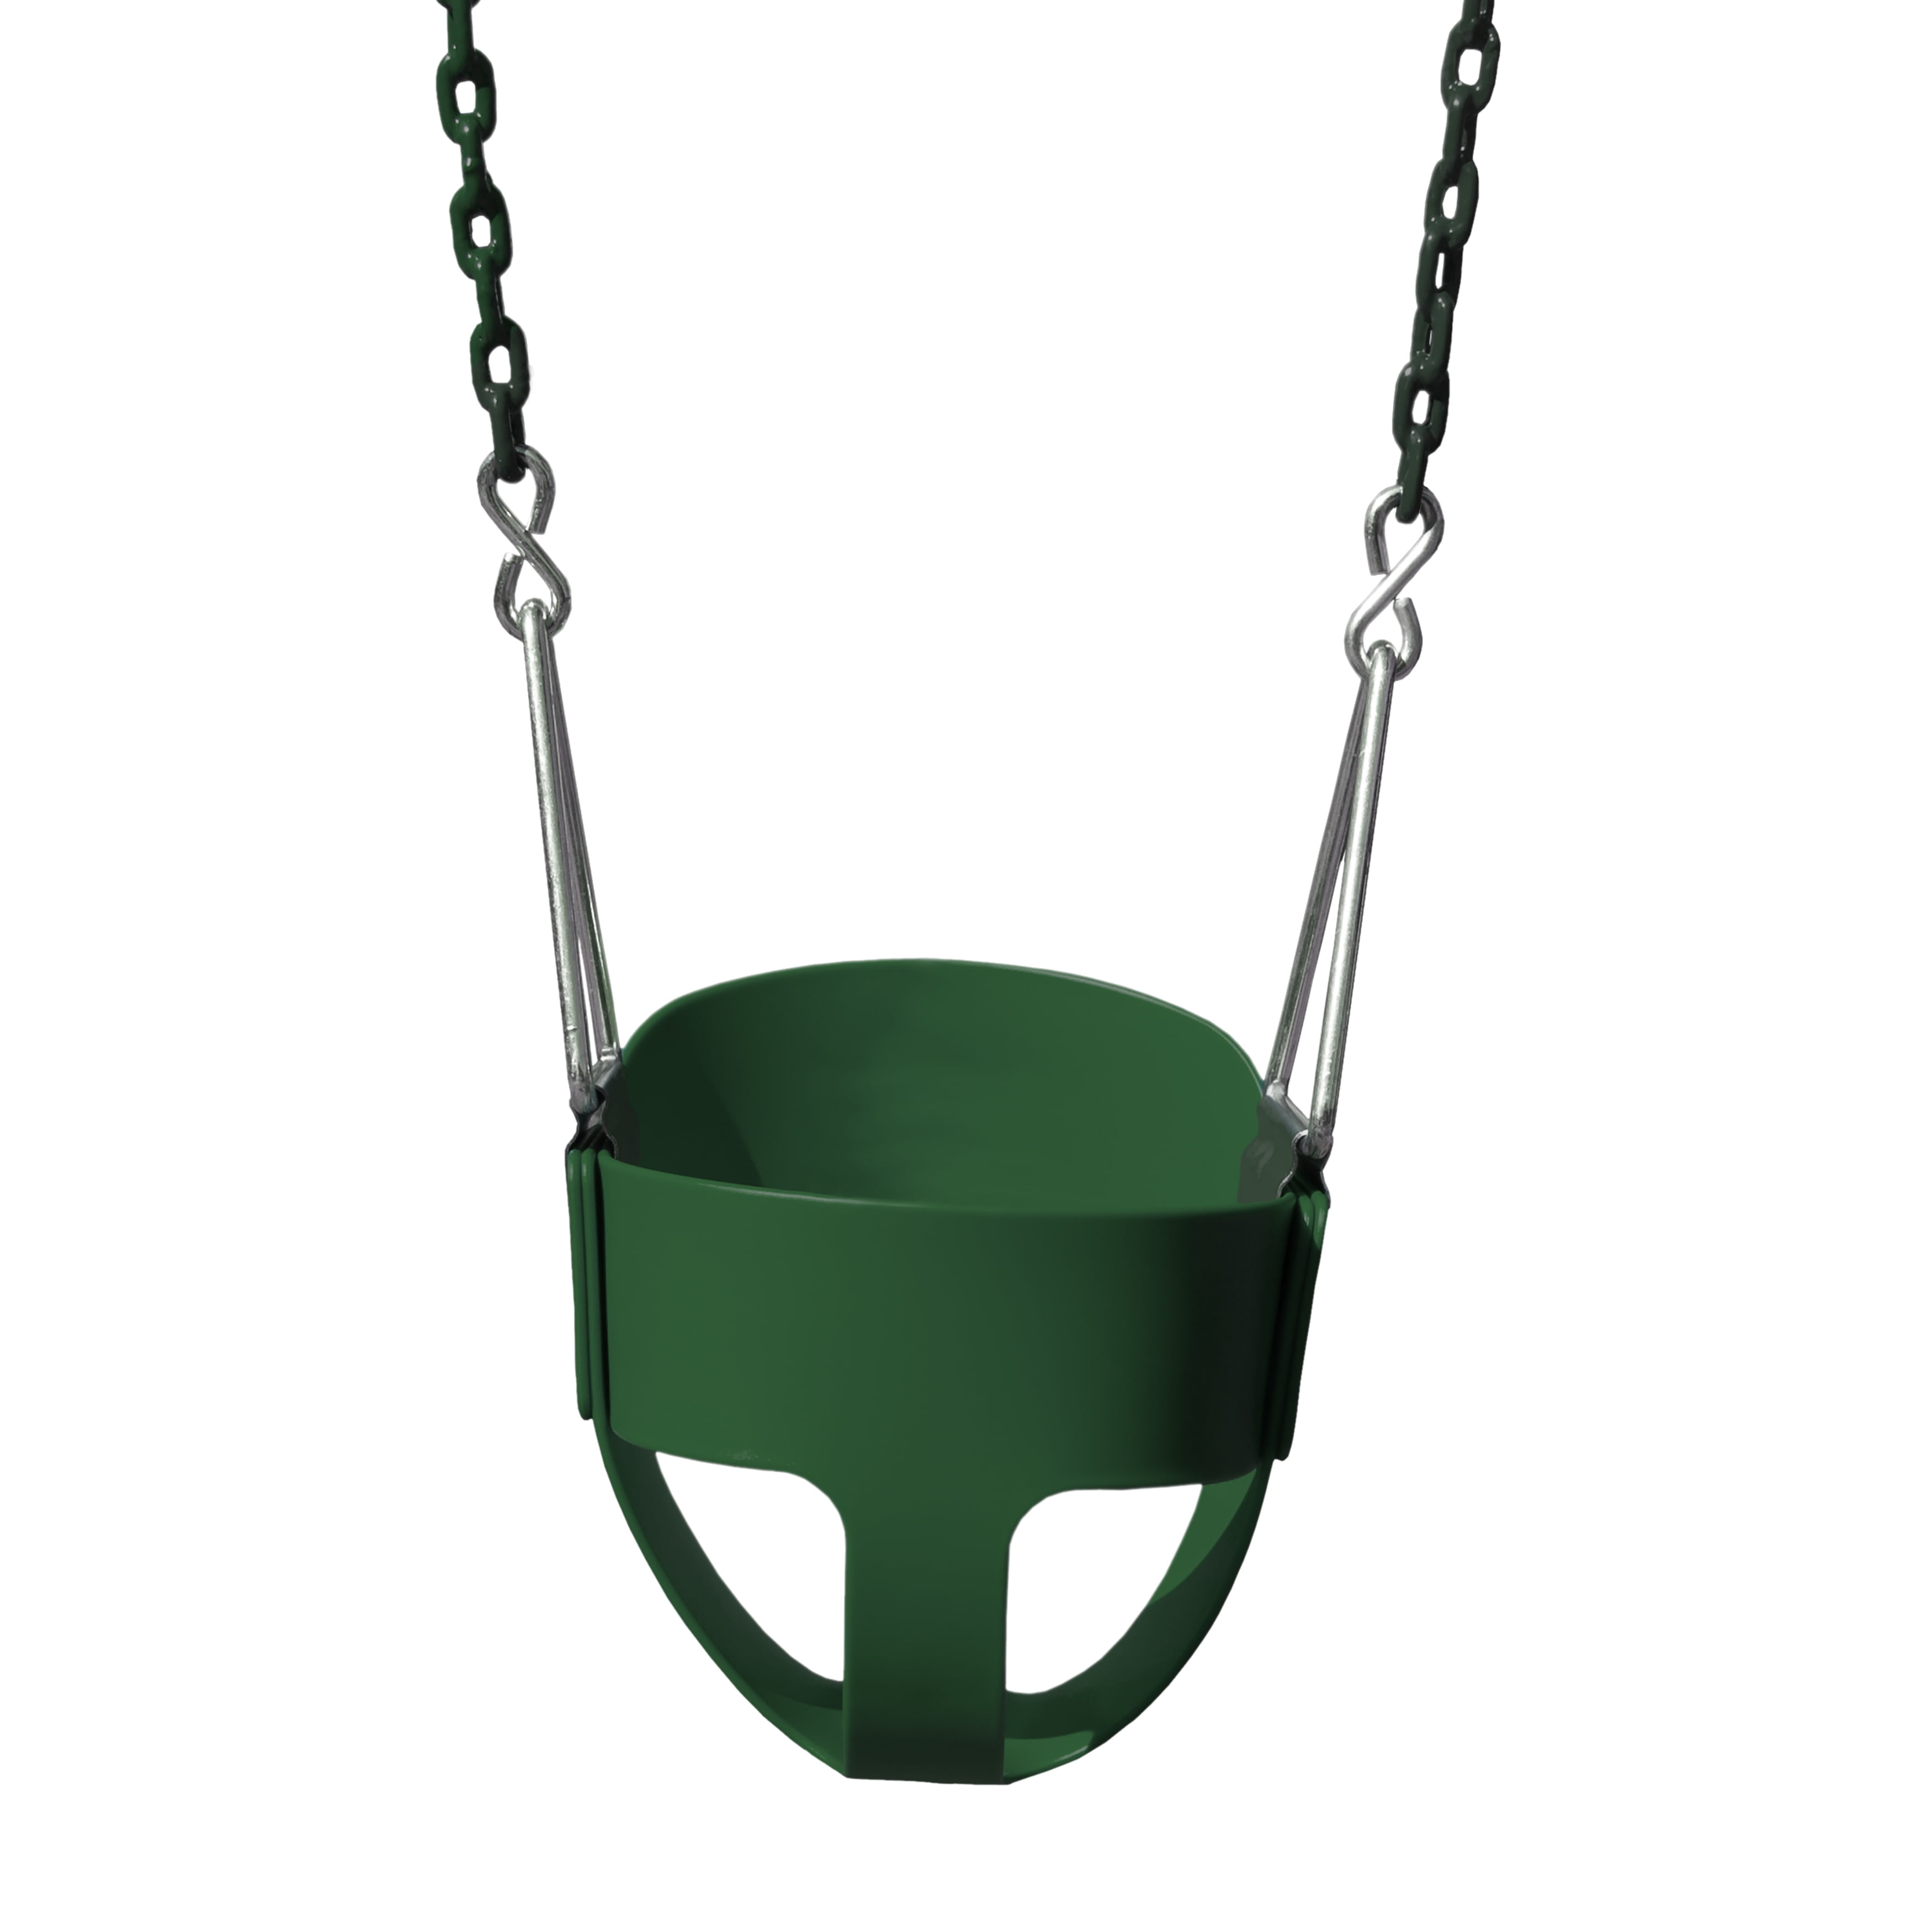 Heavy-Duty Kids Full Bucket Baby Toddler Swing Seat Outdoor Play Fun w//Chains